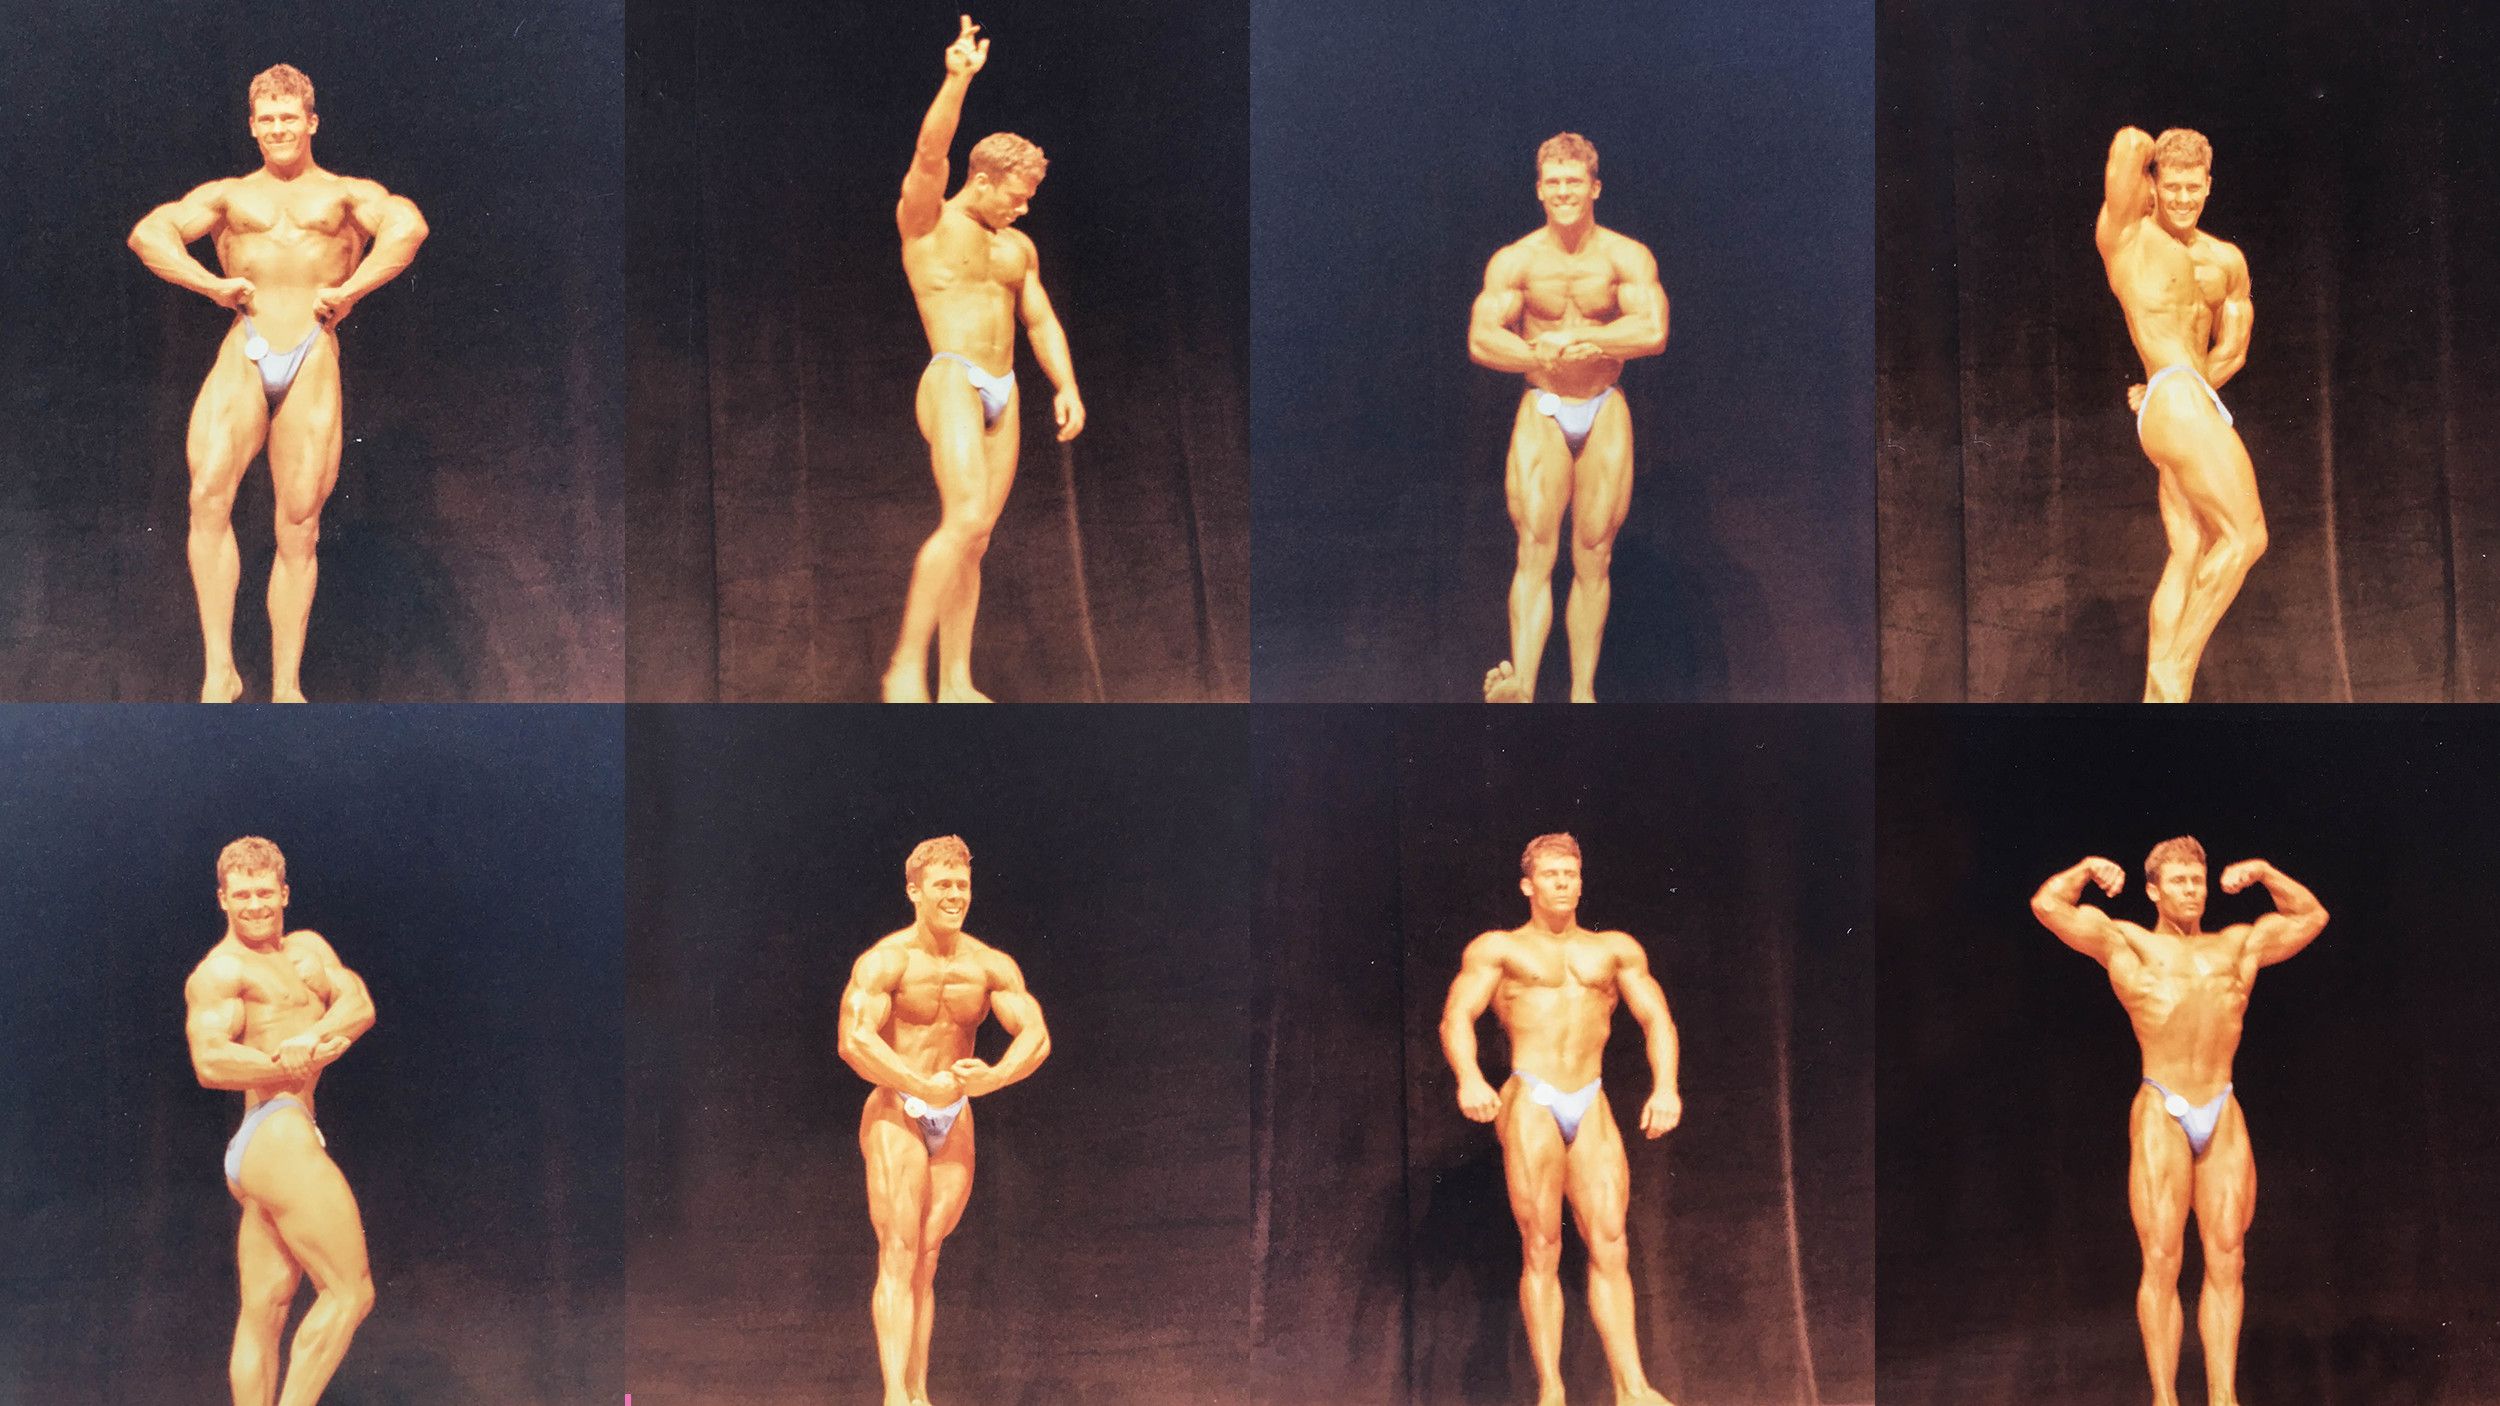 Nudism Gallery Contests - Ripped: My Life as a Competitive Bodybuilder